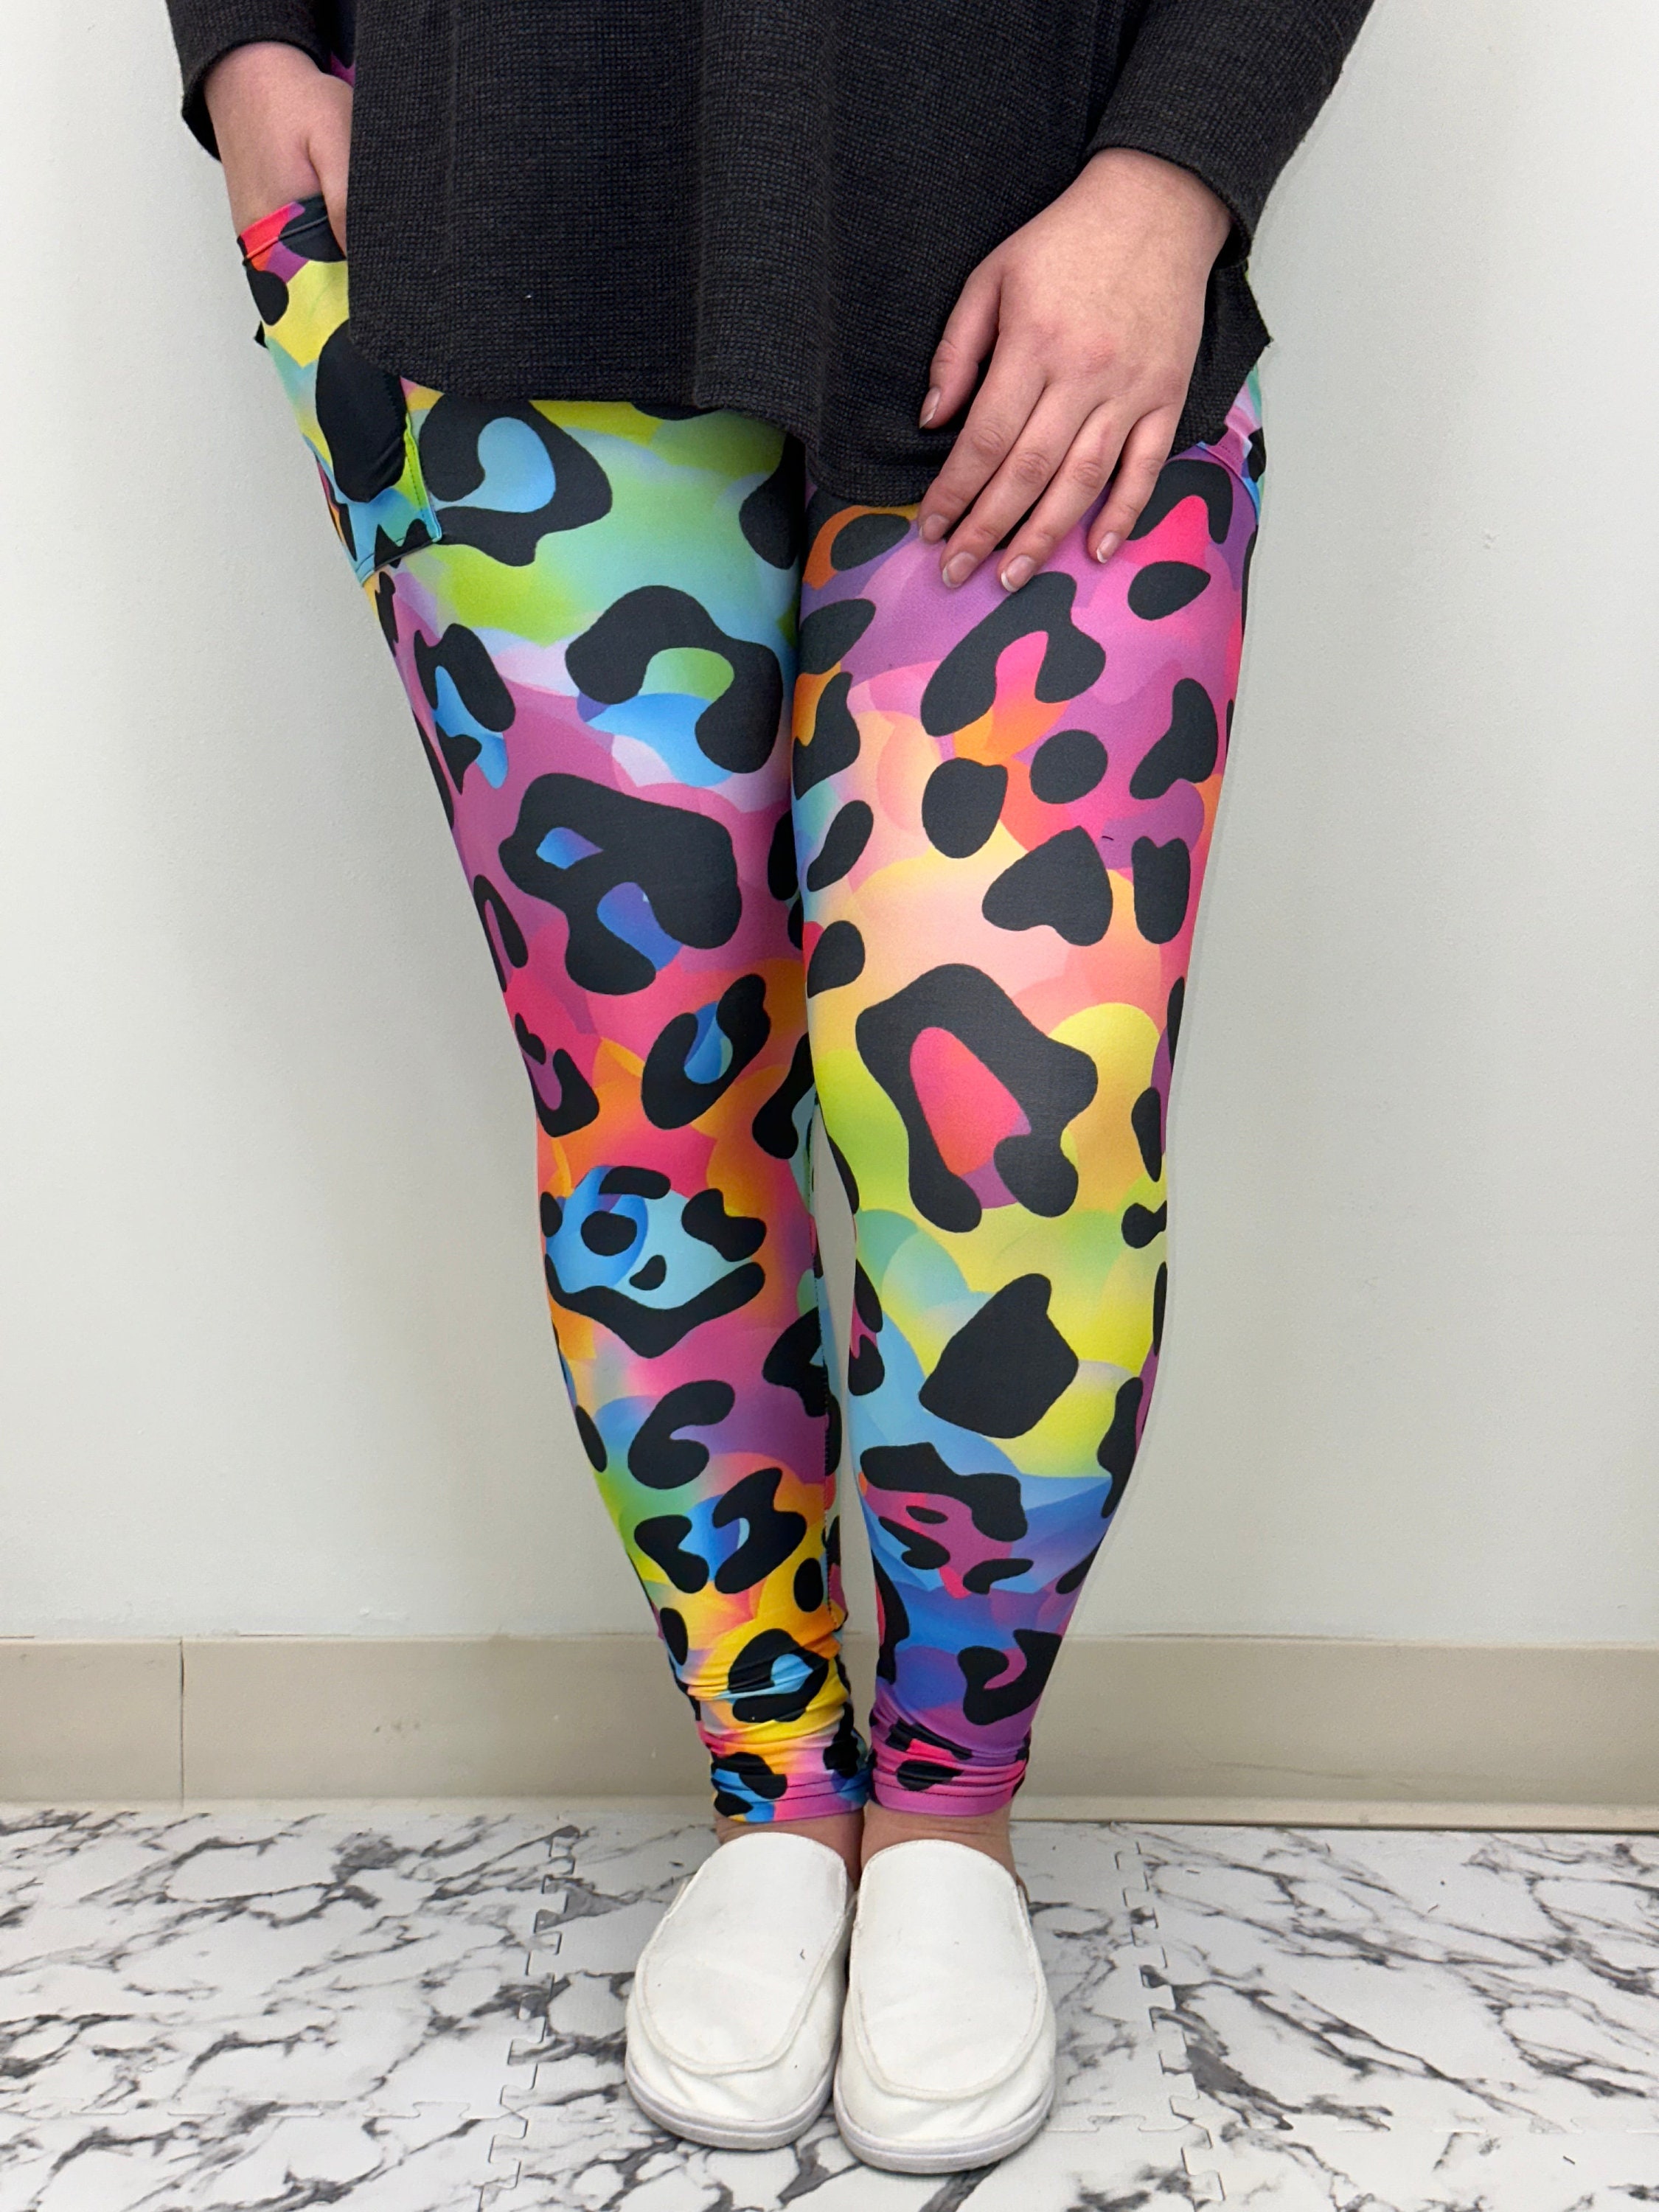 Rainbow Leopard Suspender Leggings with Quad Cutouts on Legs - Top sold  separately 157706 - Women's Clothing